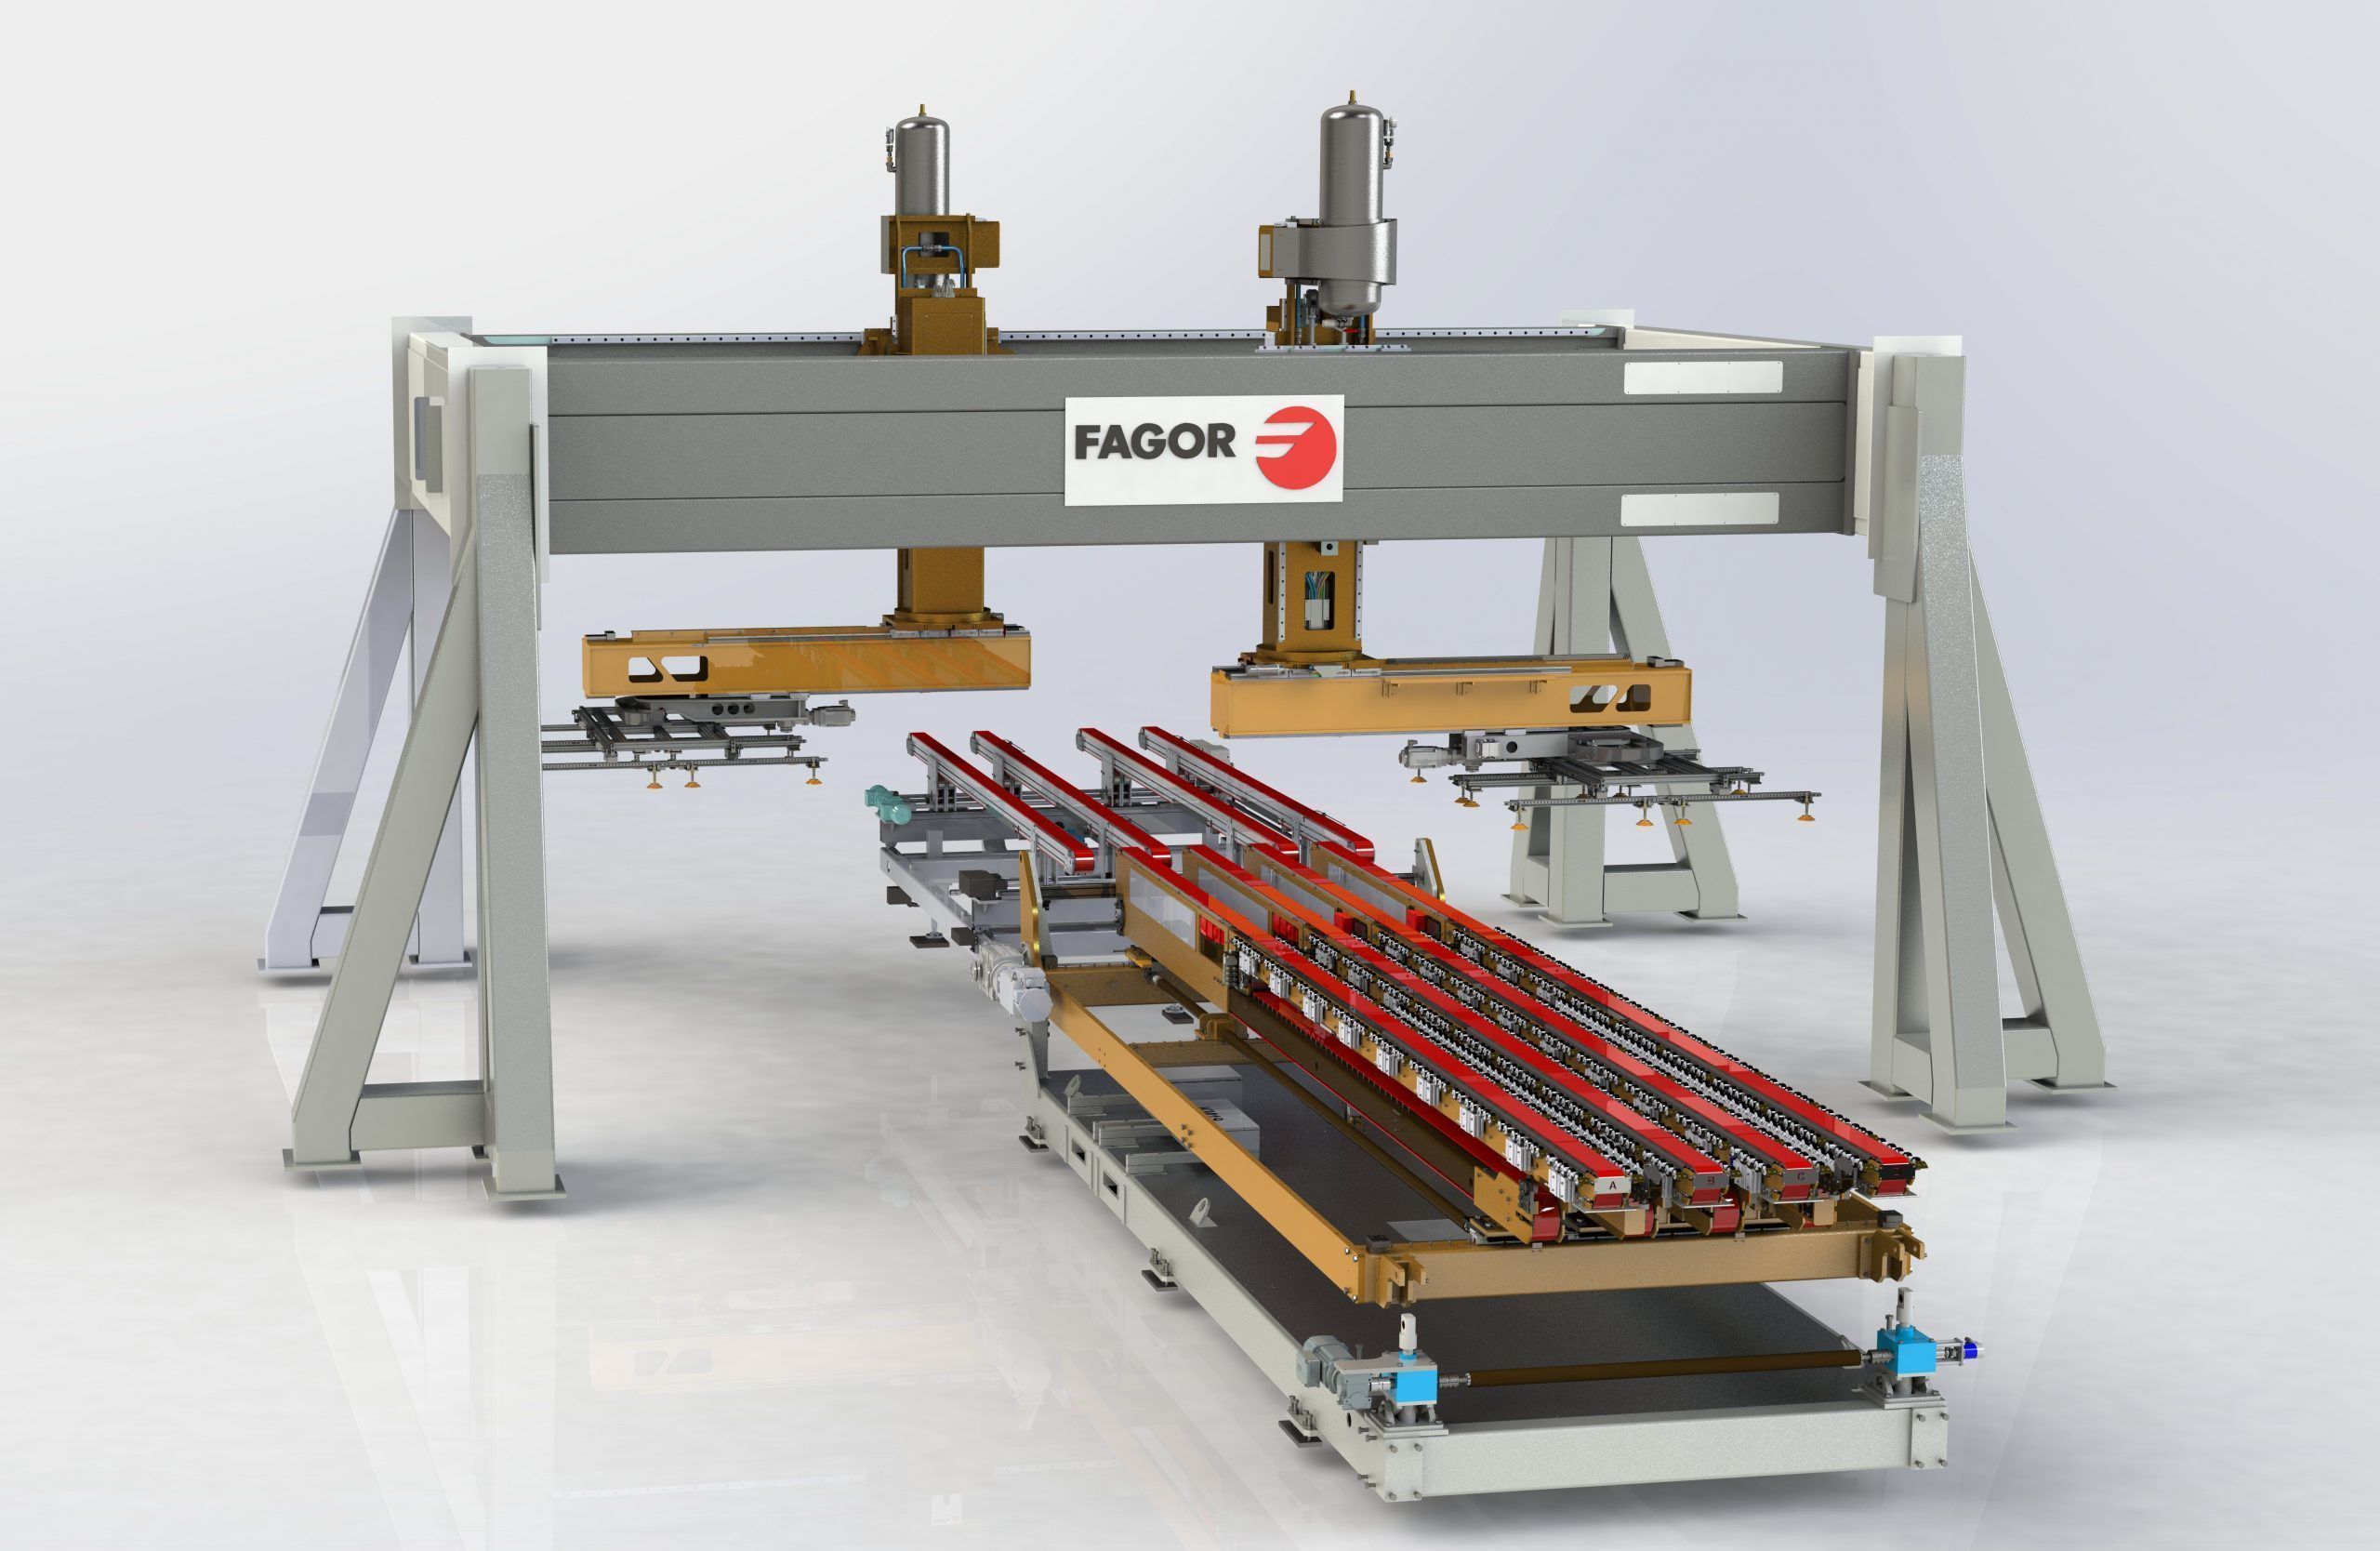 Fagor Arrasate event: Efficient stacking solutions adapted to each type of customer and material